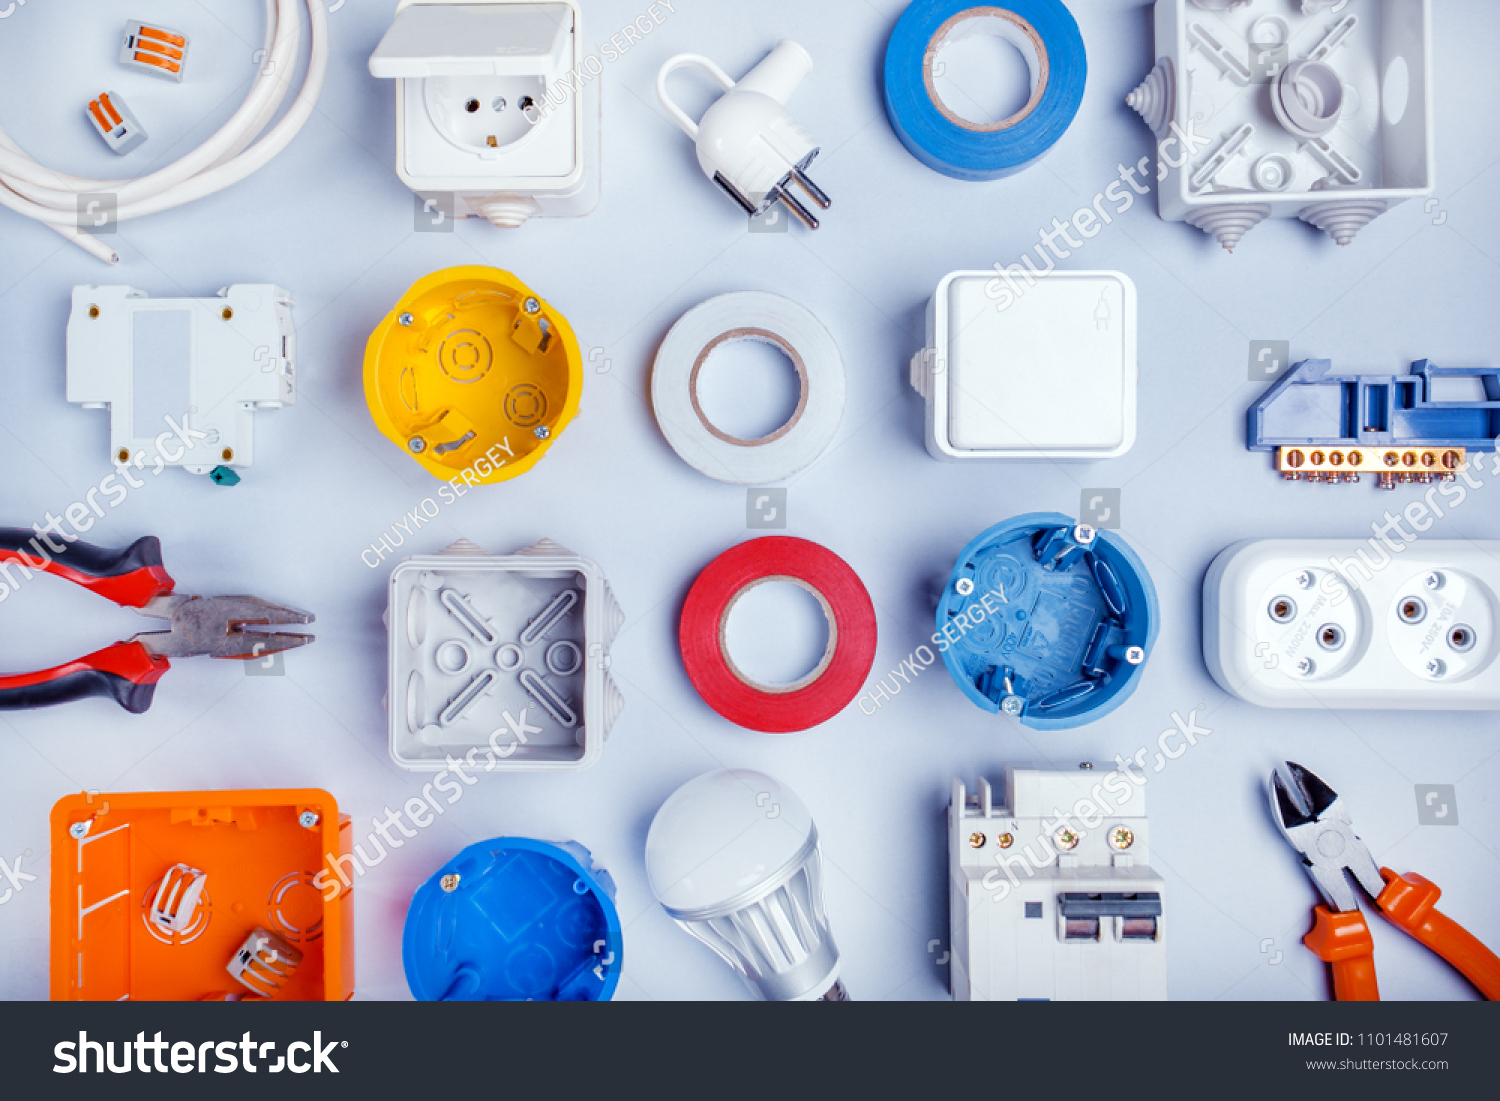 Different electrical tools on light grey background with plase for text, top view. #1101481607